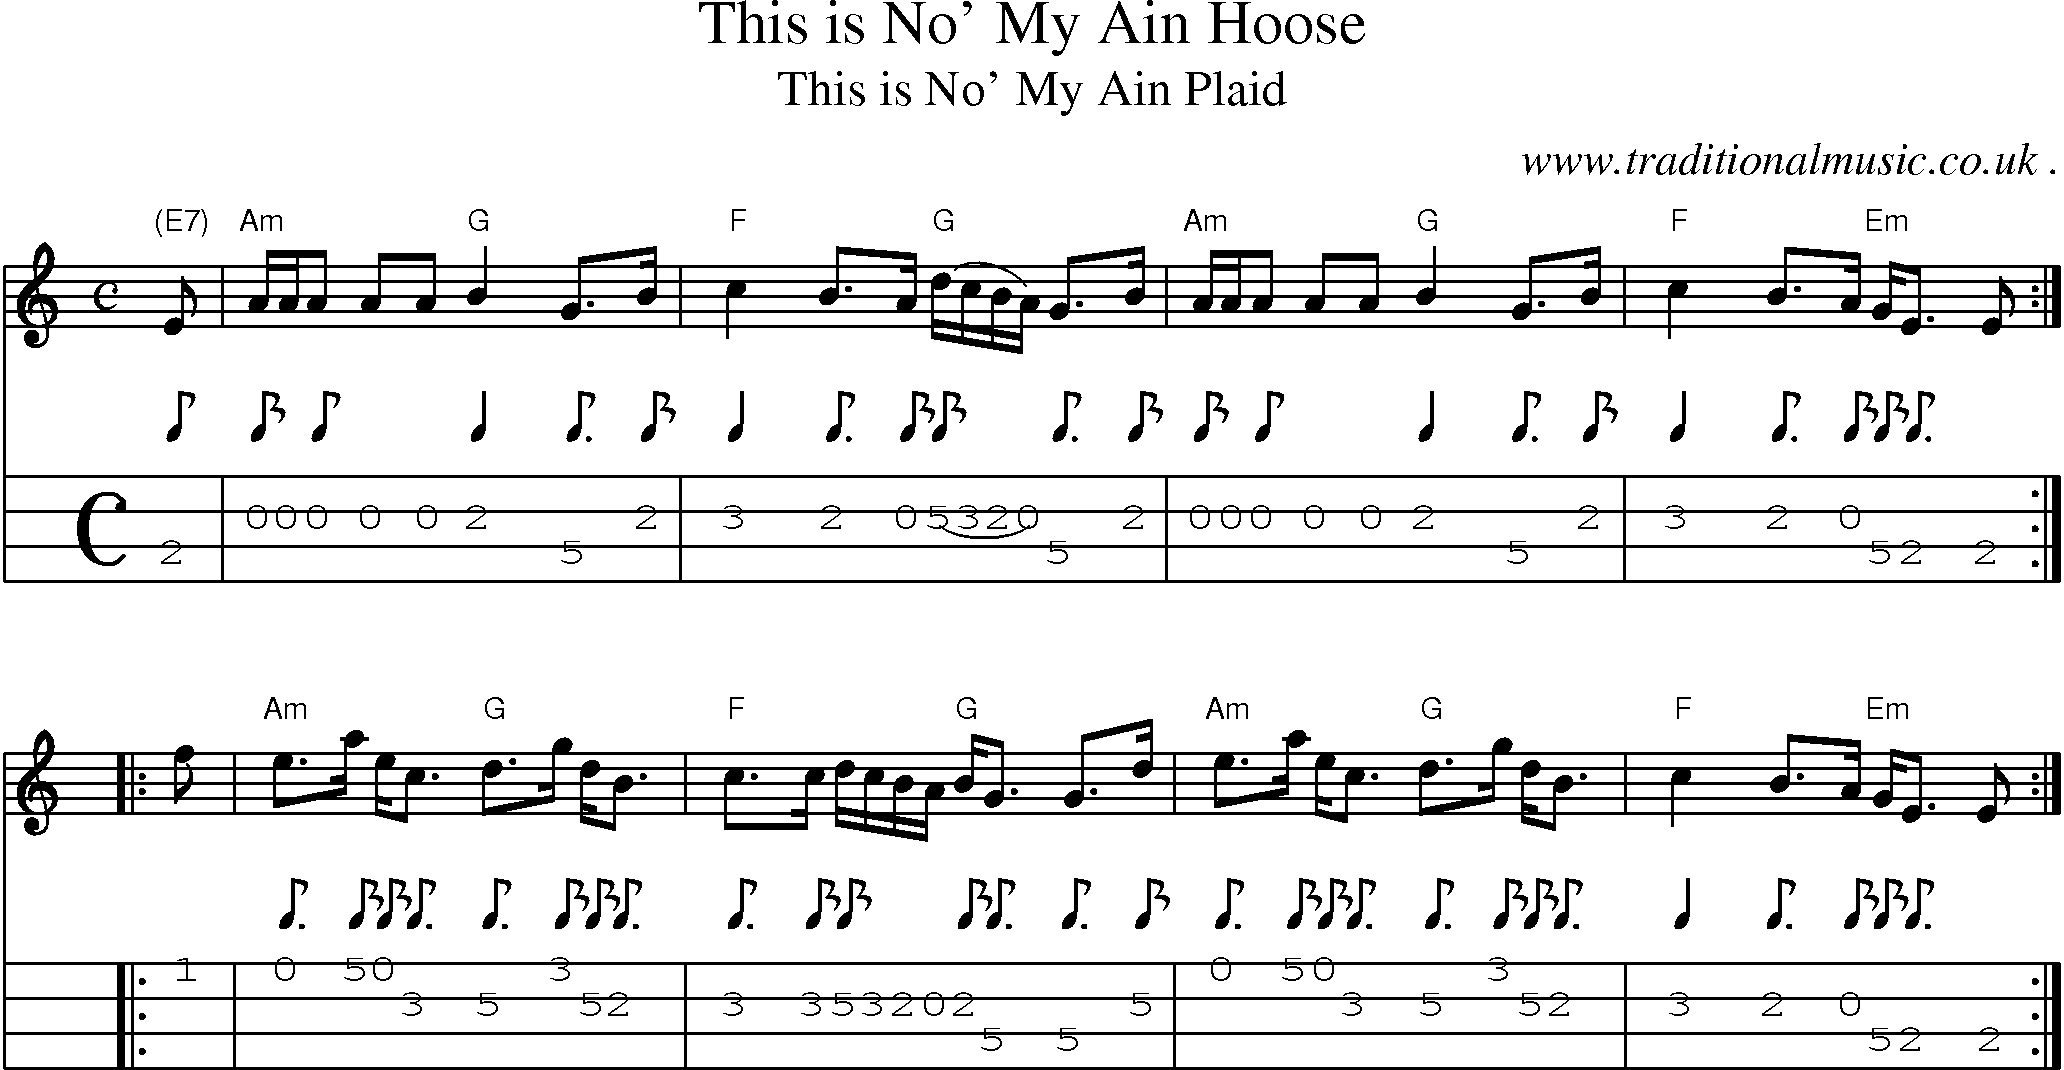 Sheet-music  score, Chords and Mandolin Tabs for This Is No My Ain Hoose